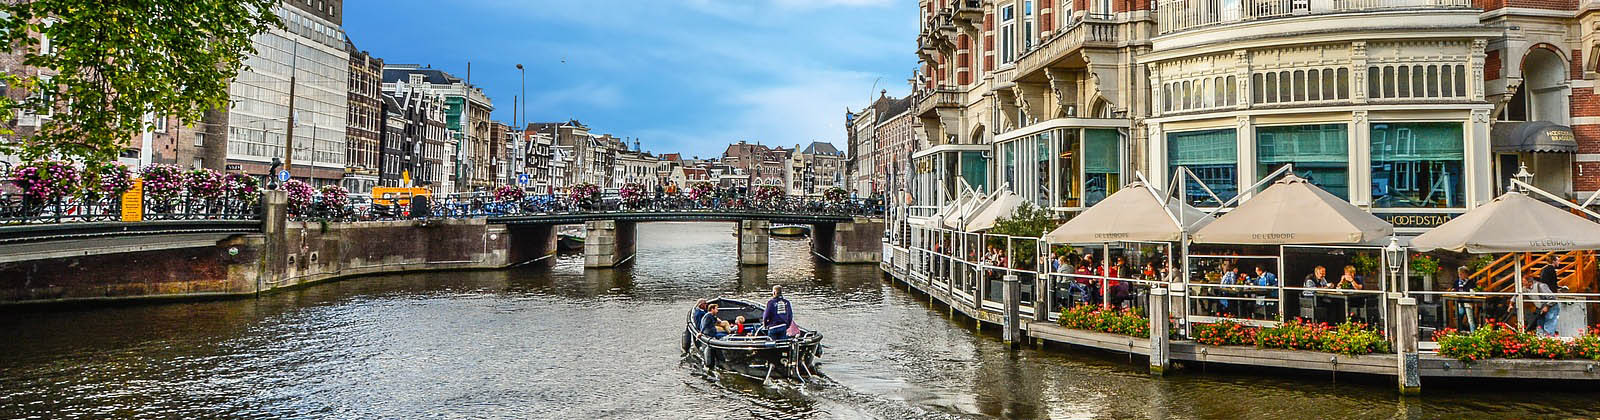 Amsterdam private canal cruise